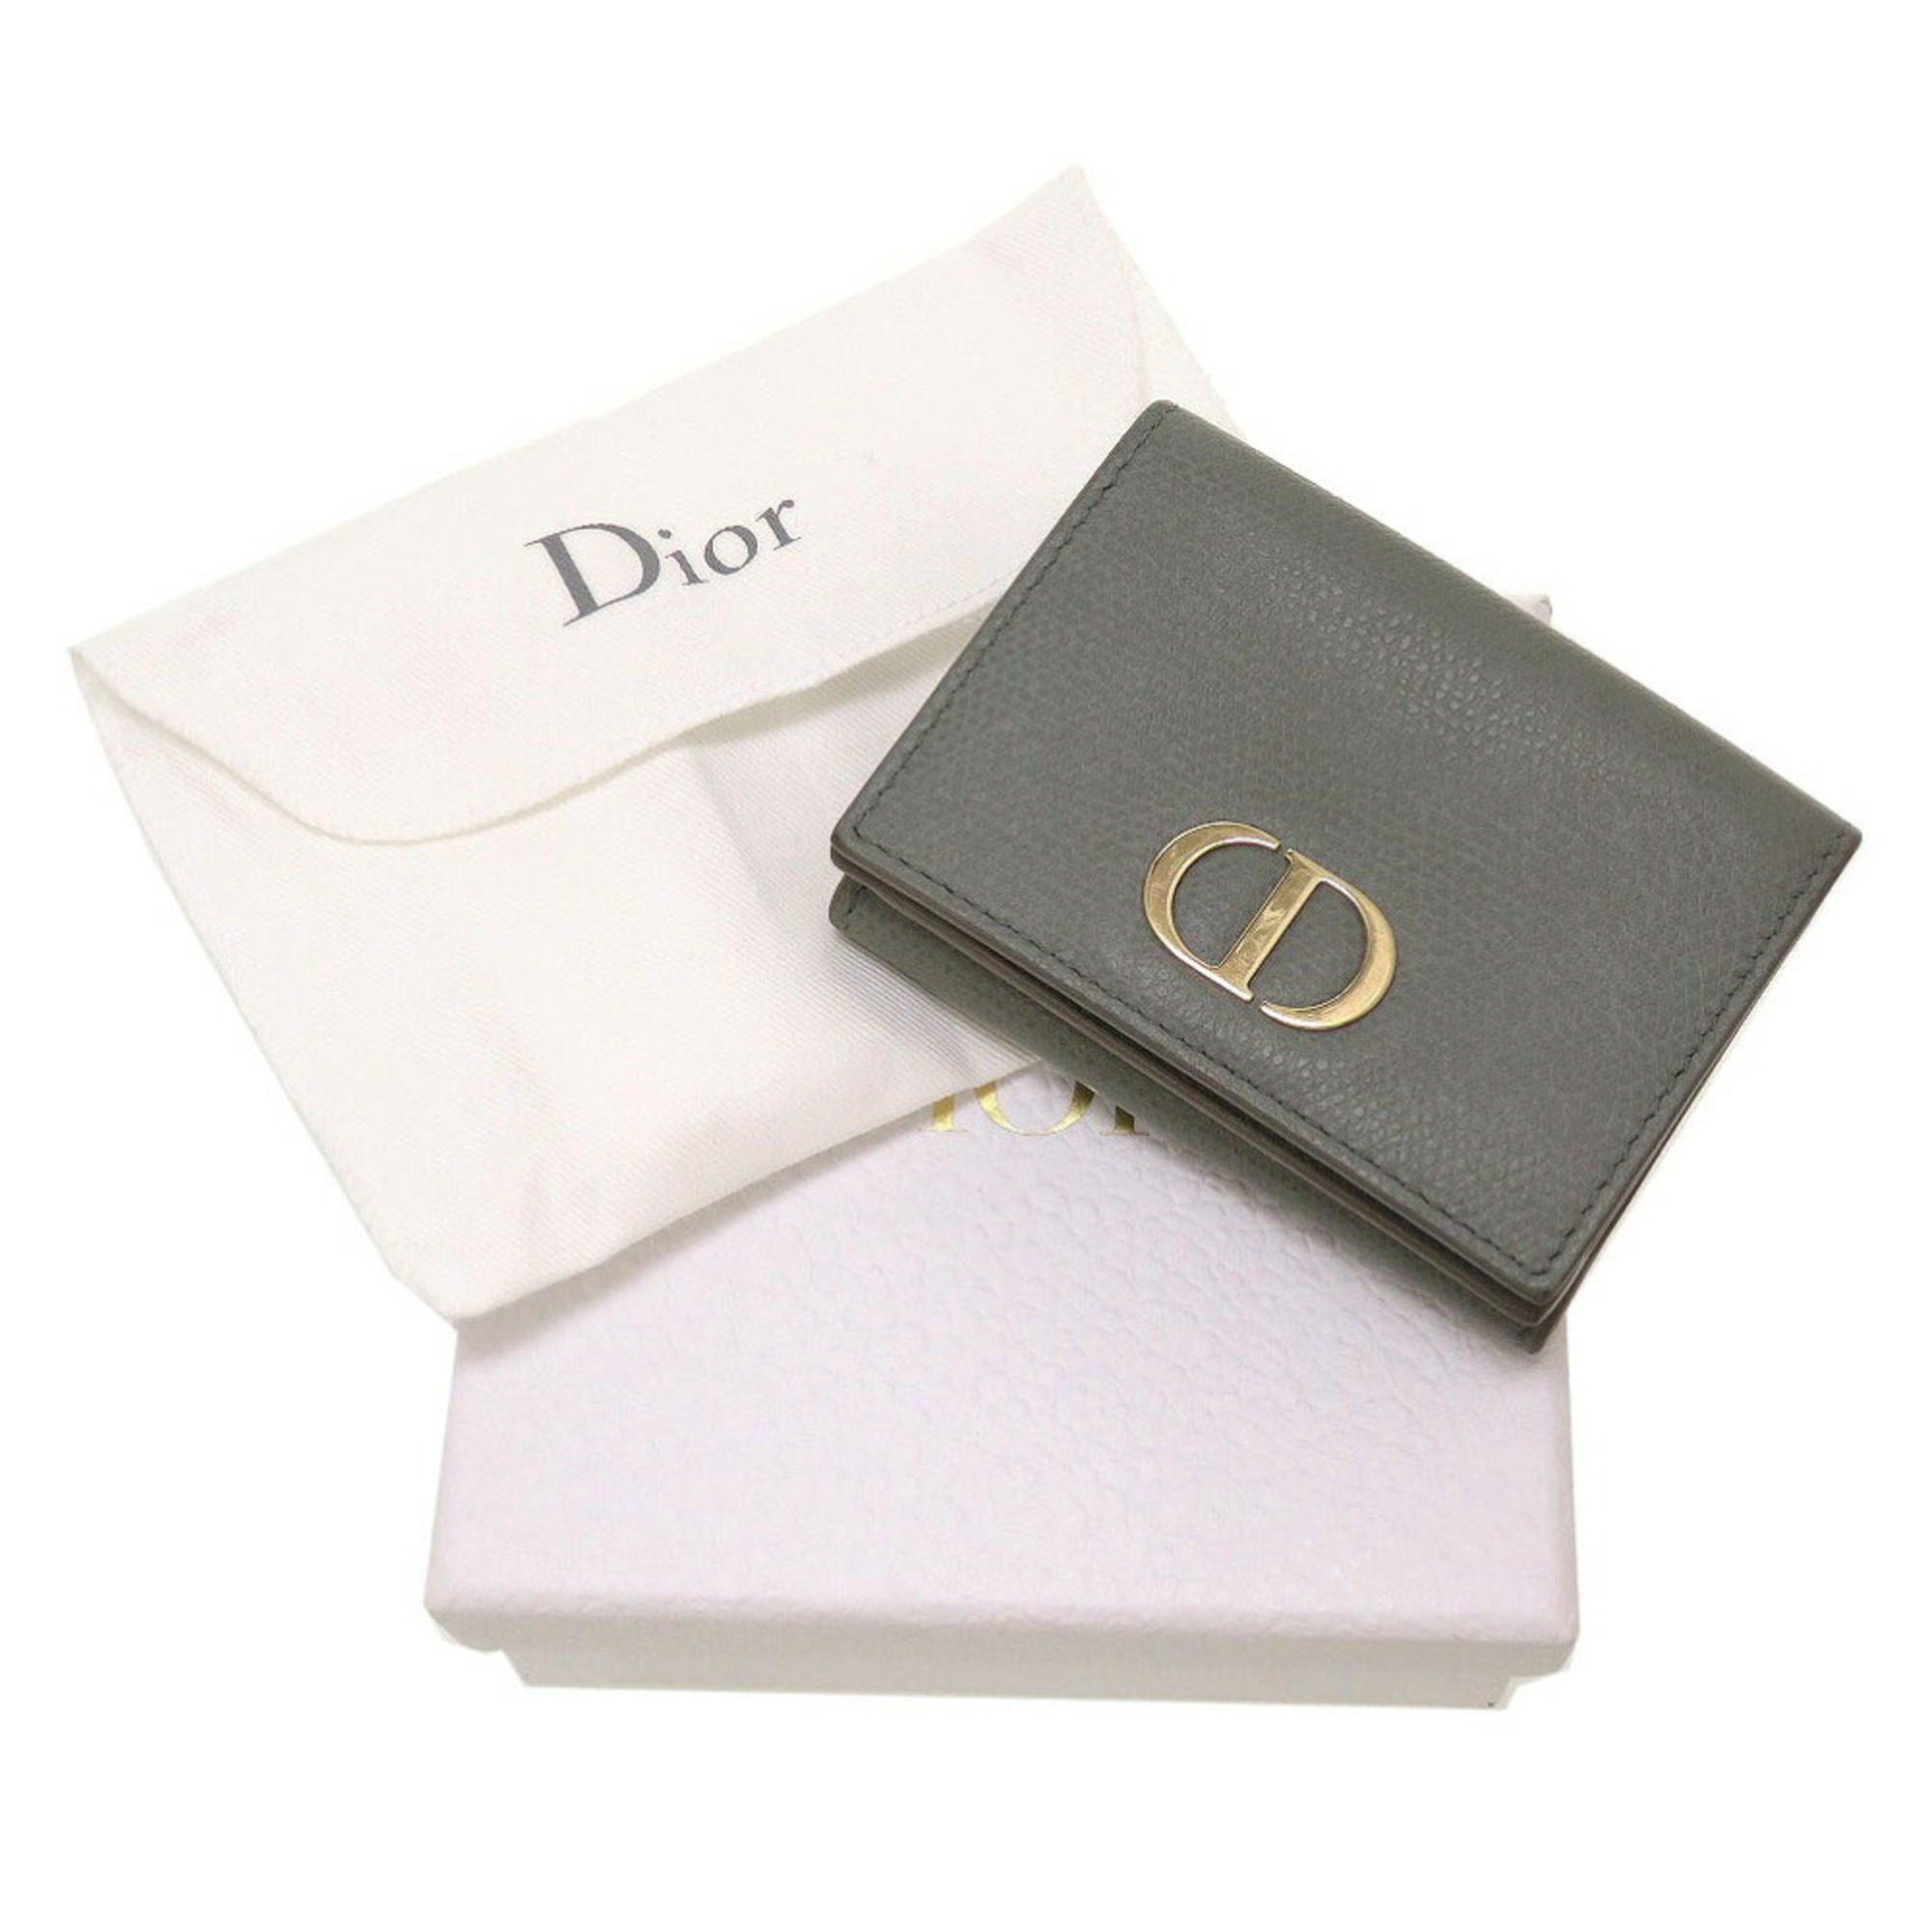 Christian Dior Leather Gray Trifold Wallet